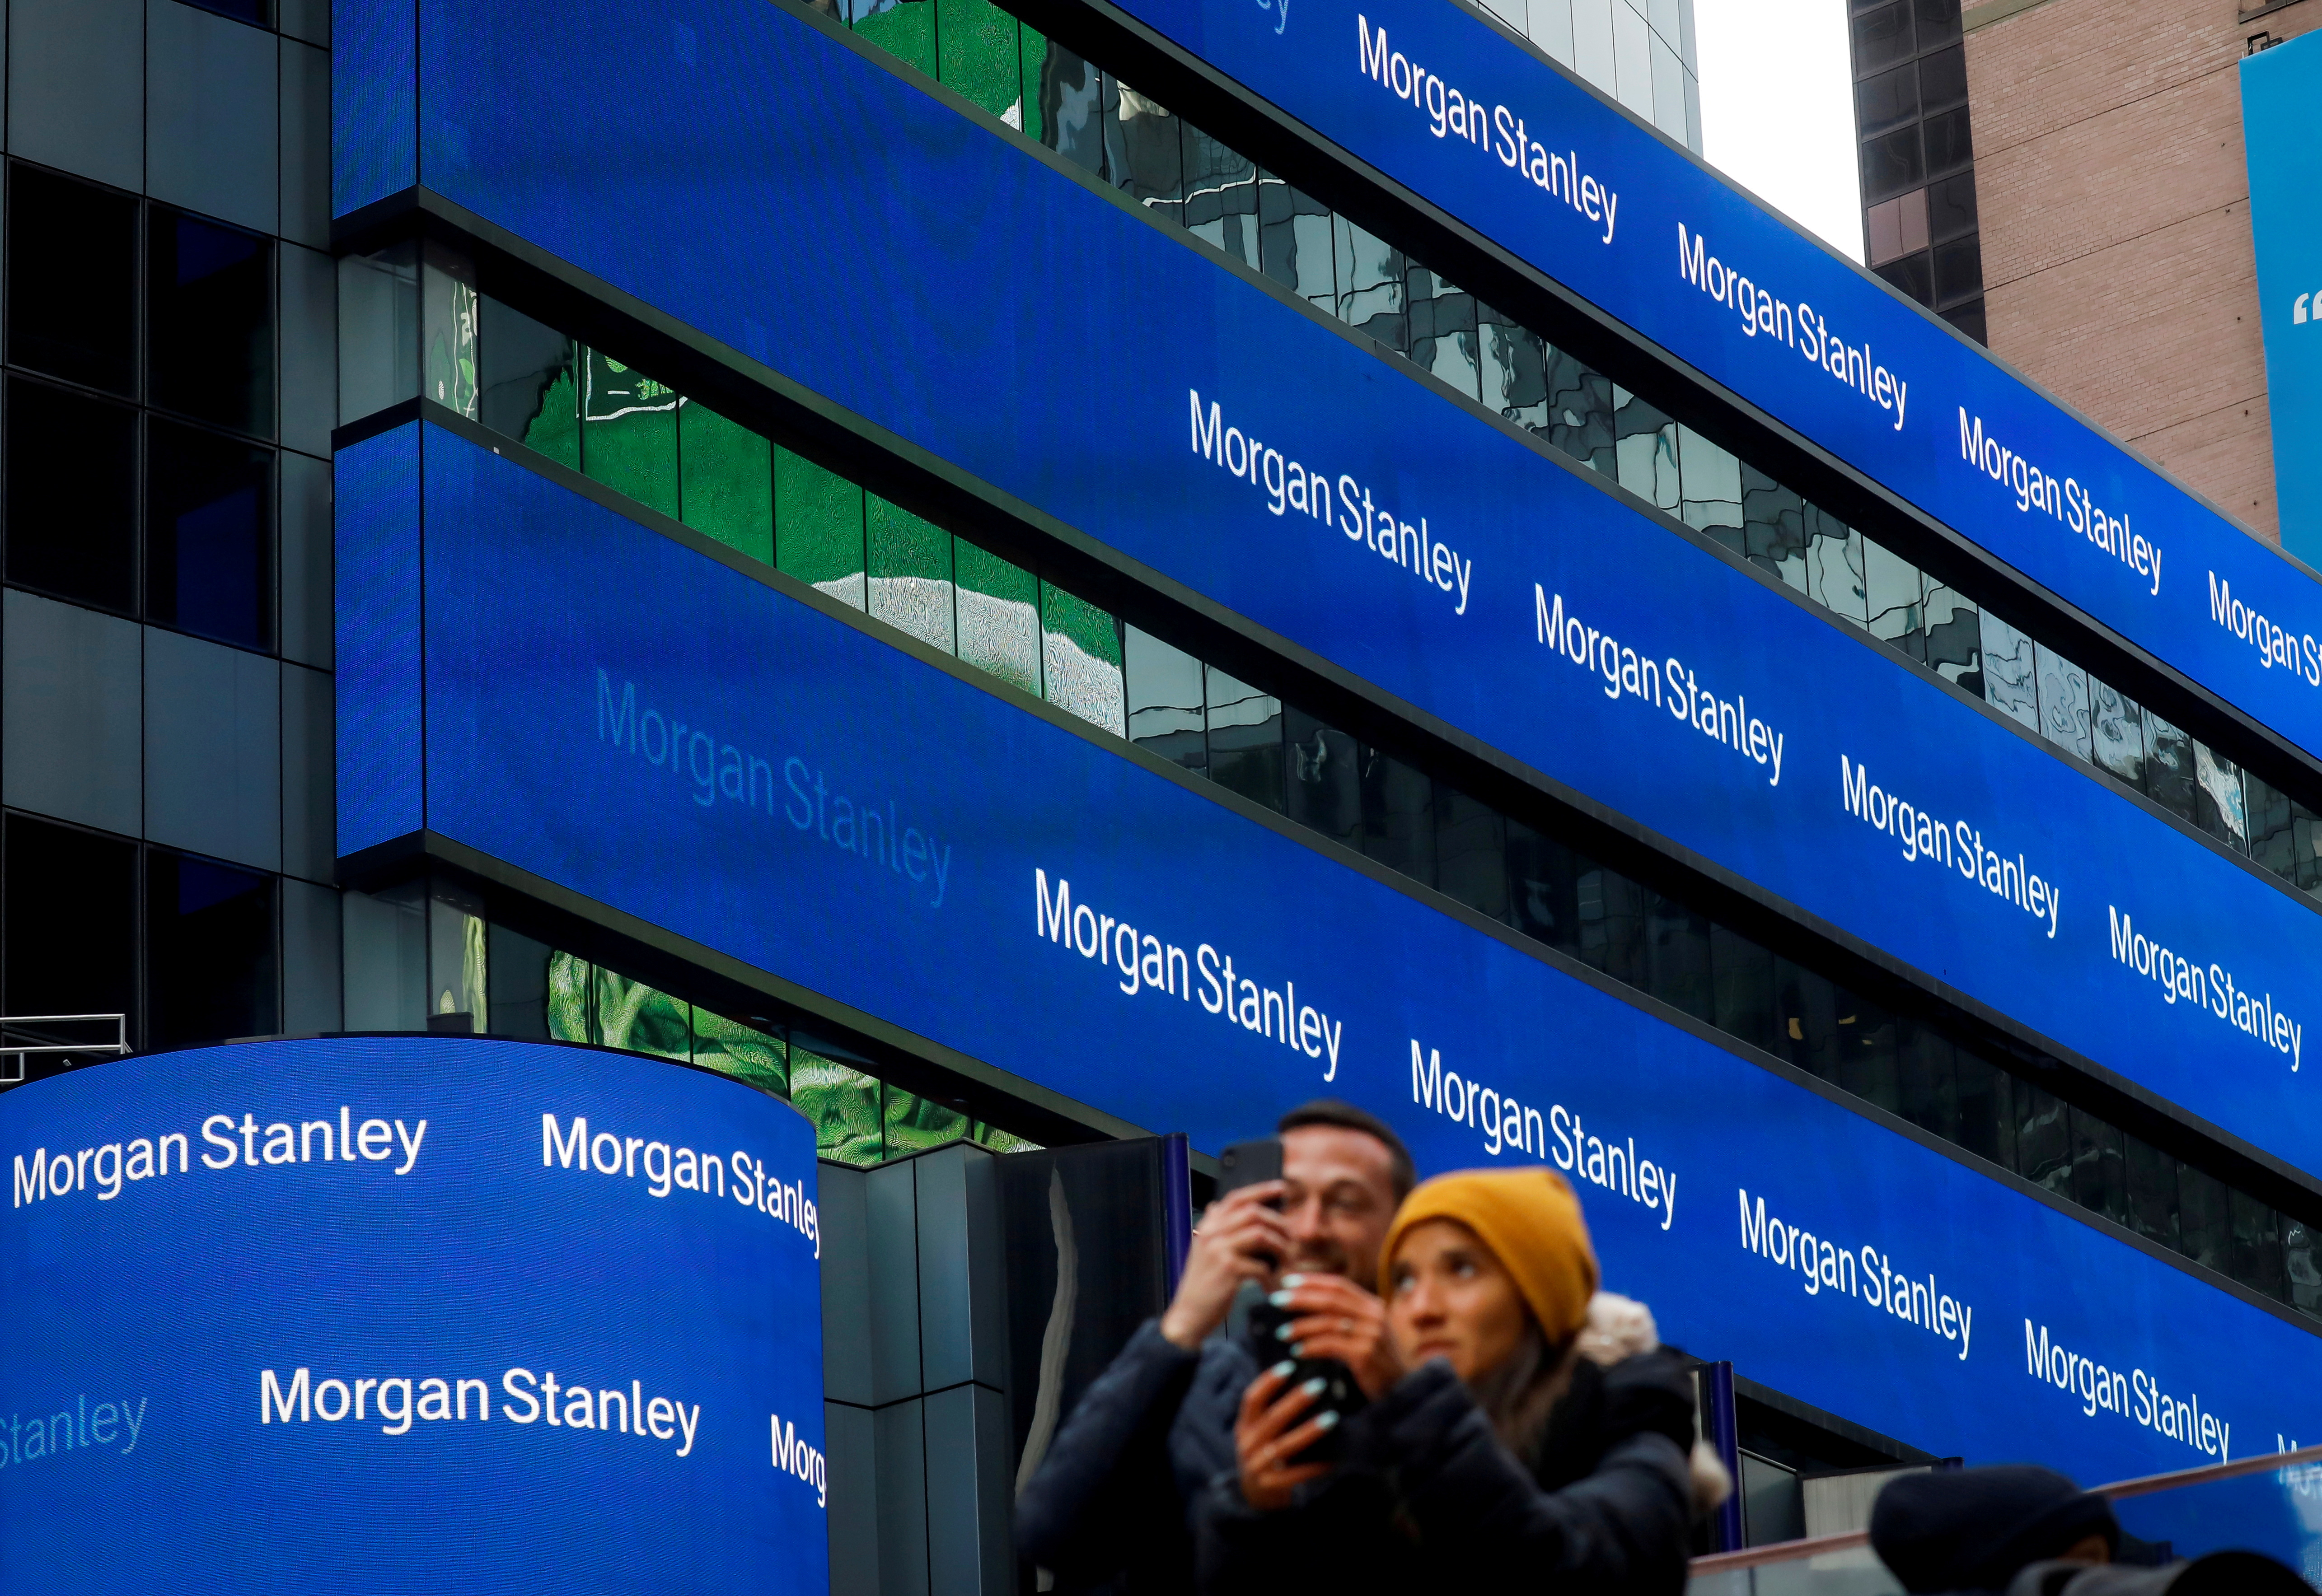 People take photos by the Morgan Stanley building in Times Square in New York